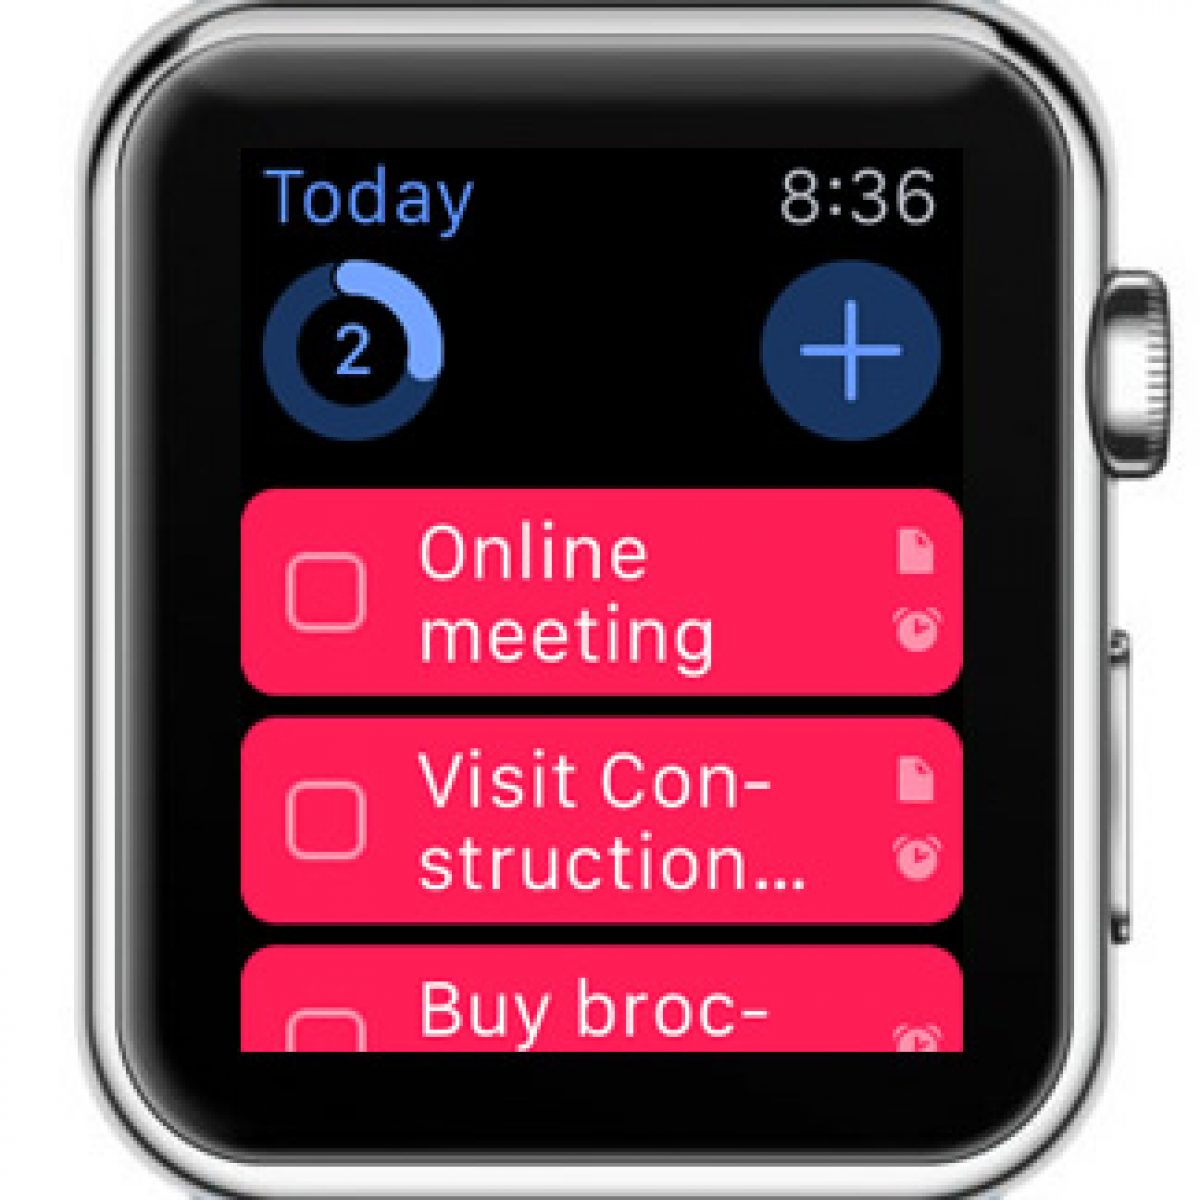 mund Anger At understrege Things - A Popular iPhone & Apple Watch Task Manager